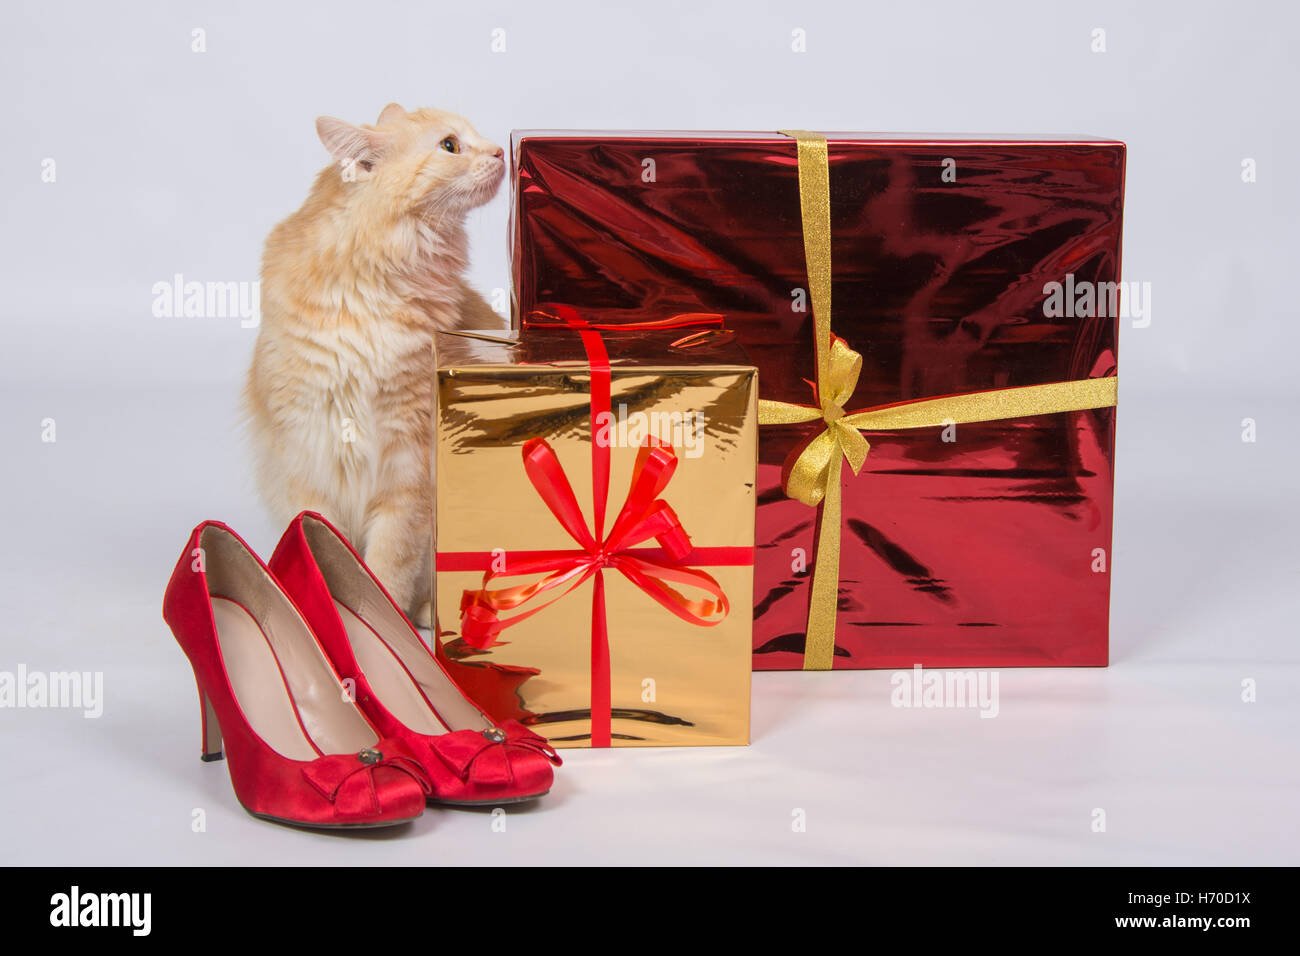 The cat sniffs the gift boxes that are next to the red lady's high-heeled shoes Stock Photo